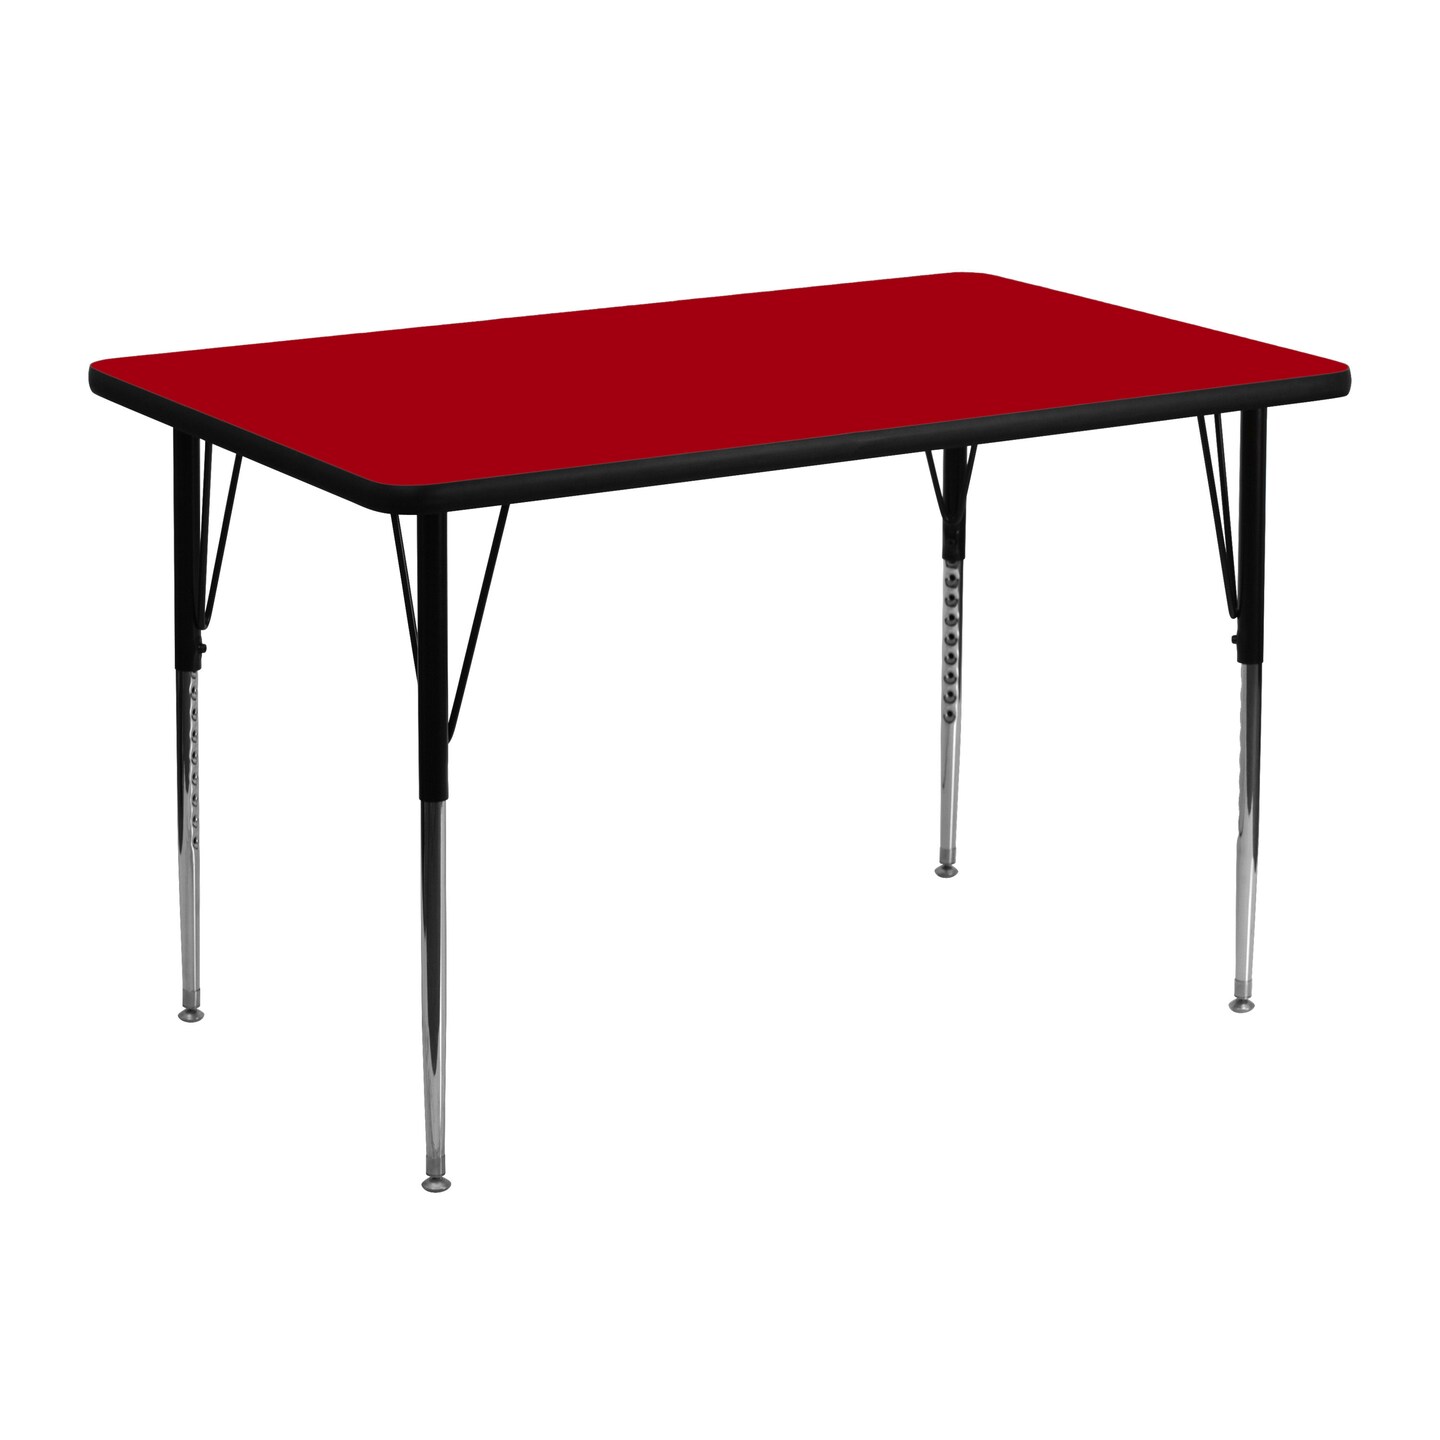 Emma and Oliver 30x48 Rectangle Laminate Adjustable Activity Table